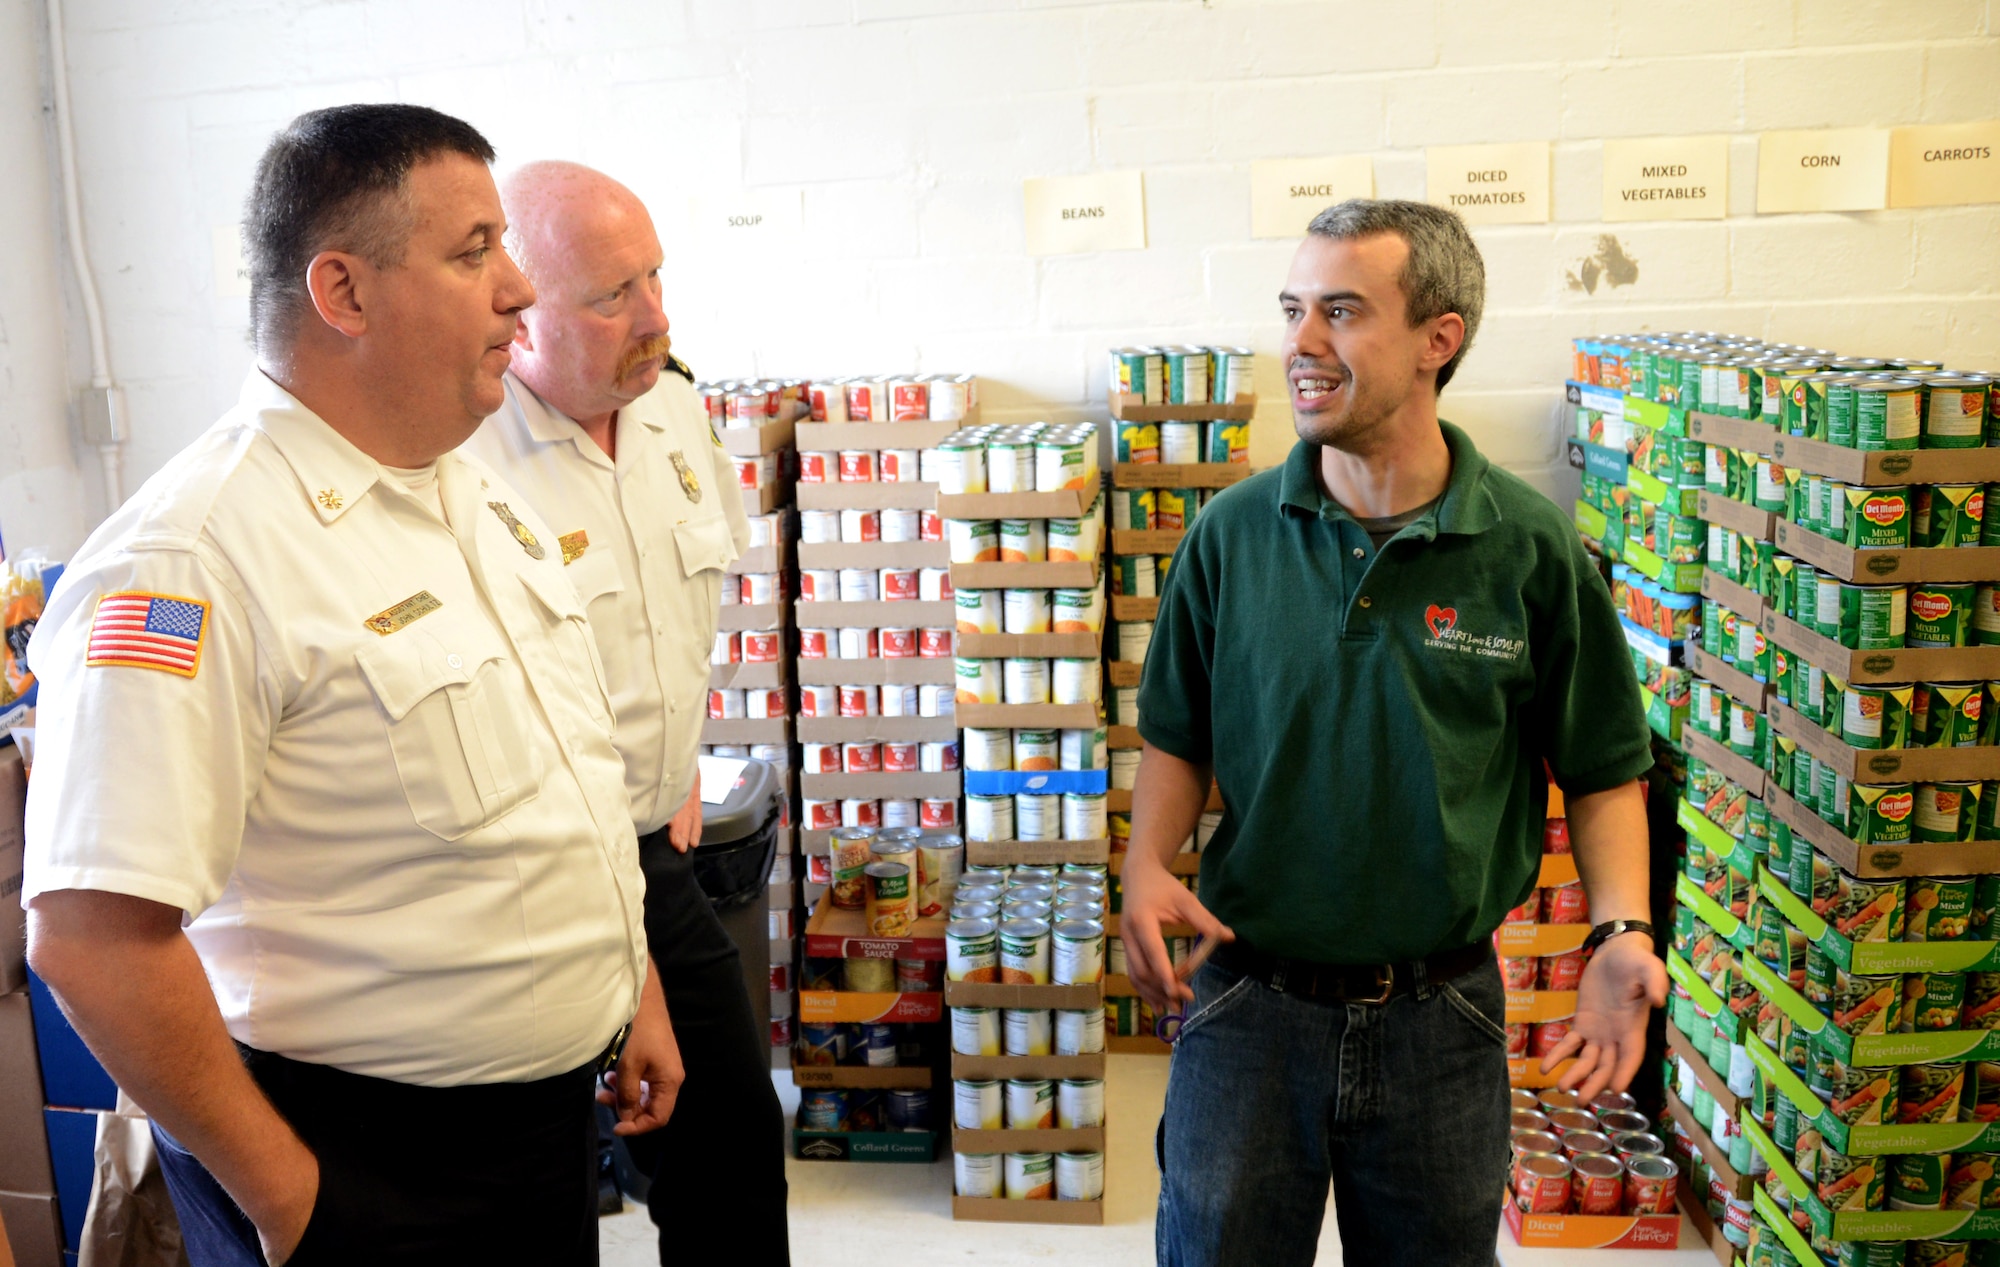 Niagara Falls Air Reserve Station Fire Chief Richard Kennerson, Assistant Chief of Fire Prevention John Schultz, speak with Heart, Love and Soul Inc. Food Pantry and Dining Room Operations and Personnel Manager Michael Daloia in the food pantry store room. Using the program Feds Feed Families, 914th Airlift Wing Airmen and their civilian counterparts donated 315 pounds of food to Heart, Love and Soul Inc. located in Niagara Falls, New York on September 5, 2014.  (U.S. Air Force photo by Tech. Sgt. Andrew Caya)

